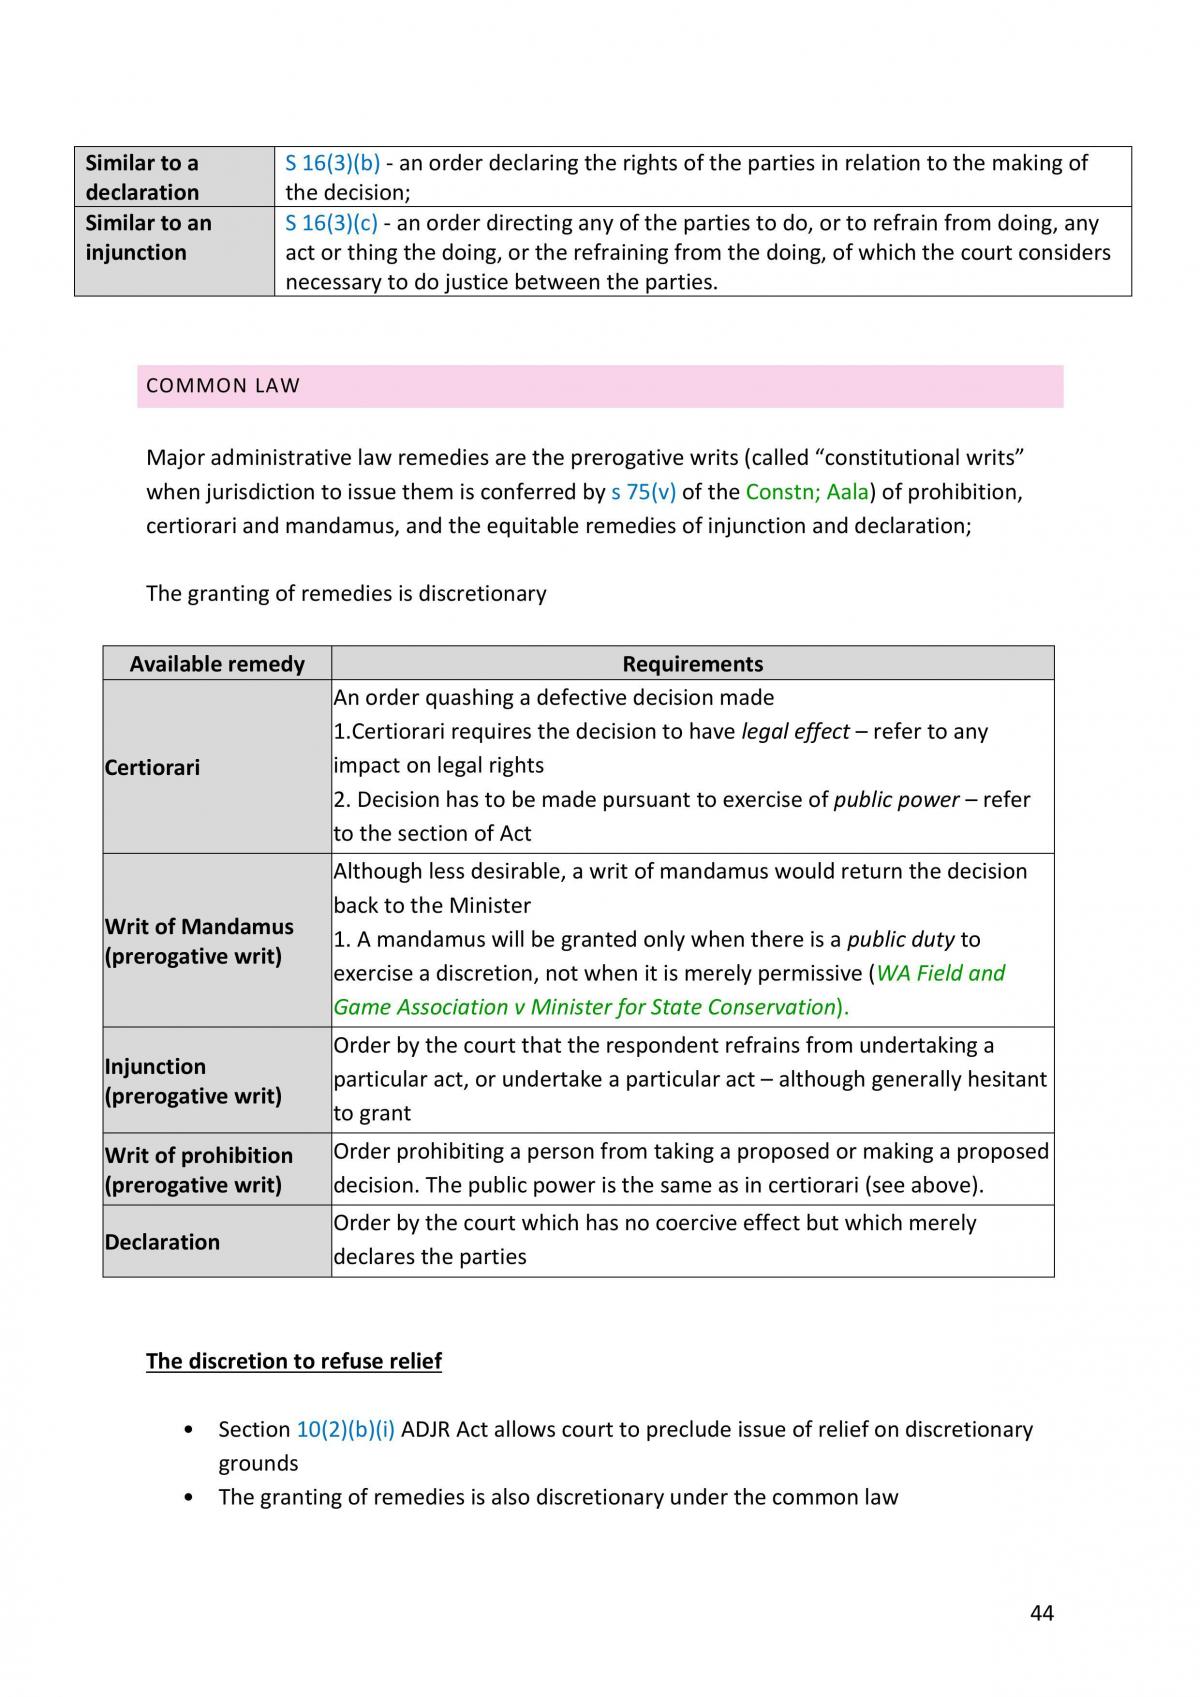 LAW4331 Exam notes (Administrative Law) - Page 45